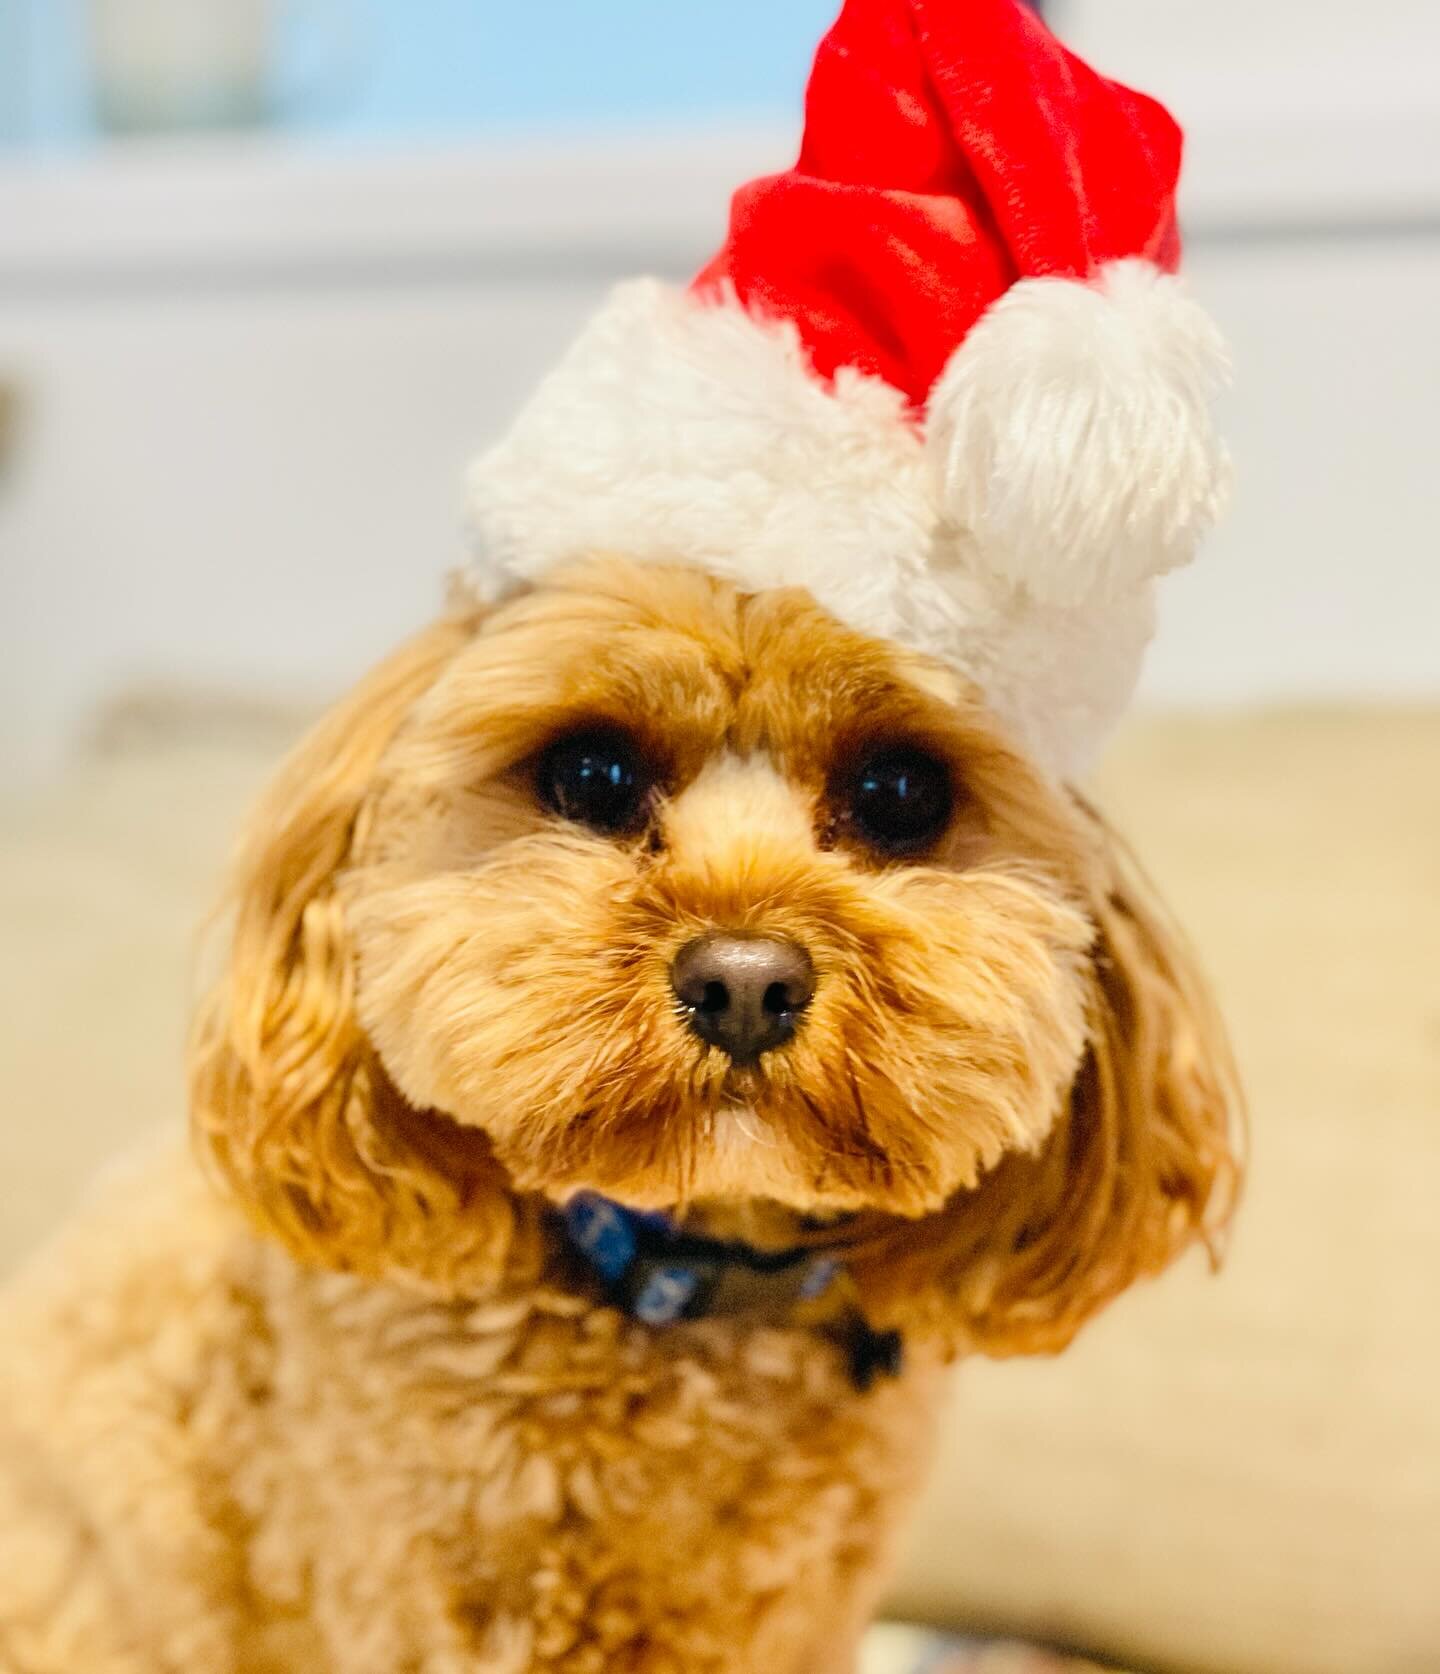 It&rsquo;s hard to believe that Christmas is just around the corner. If you&rsquo;ve got a well deserved break planned, get in touch for today as our Christmas boarding is filling up fast 🎄

To book ⬇️
📞 0410 648 185
📧 hello@gorgeouspets.com.au

#